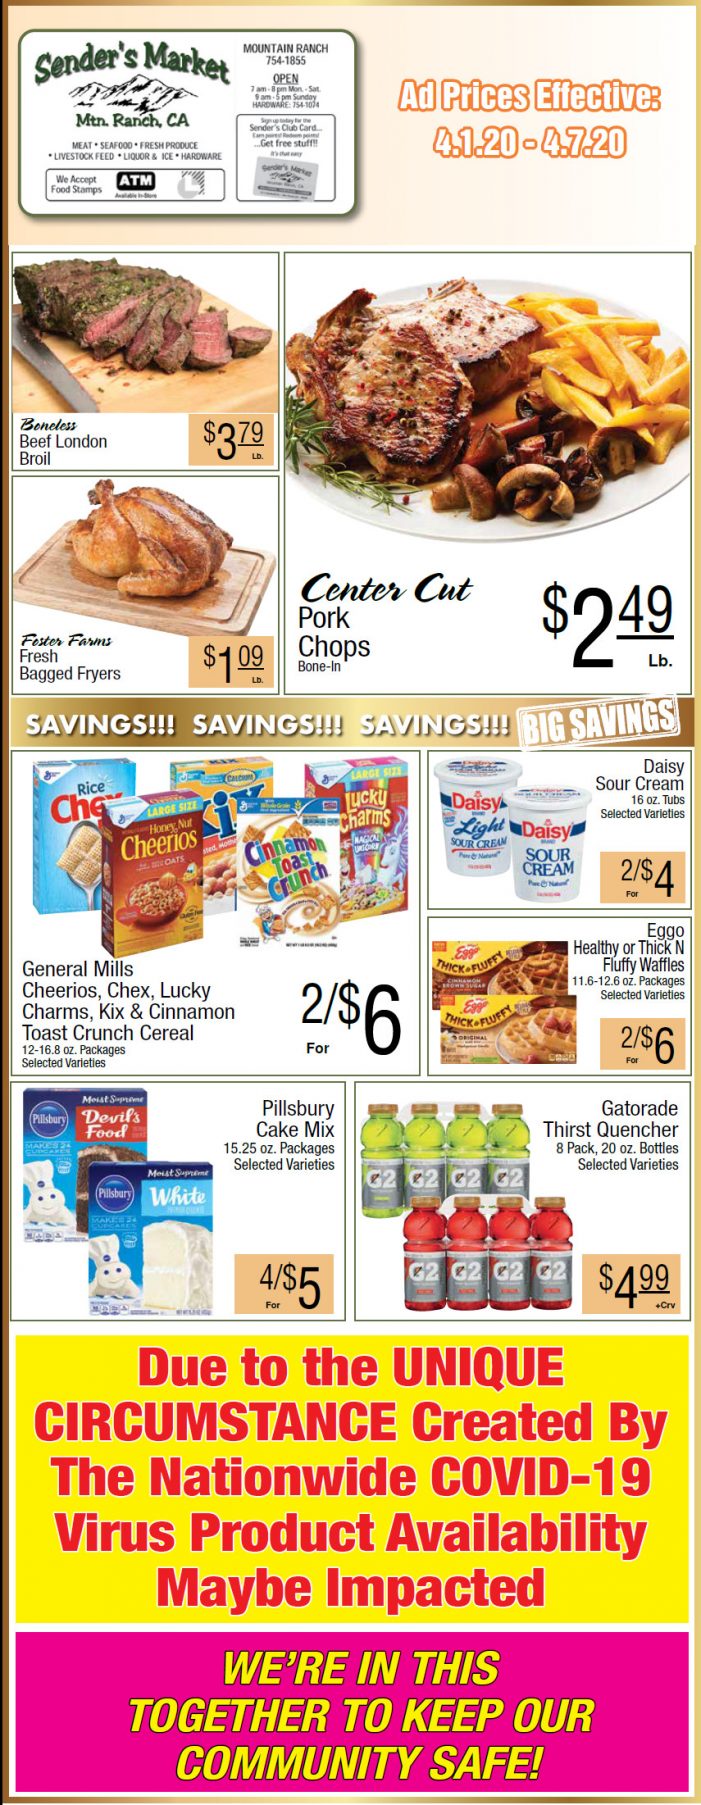 Sender’s Market’s Weekly Ad & Grocery Specials Through April 7th